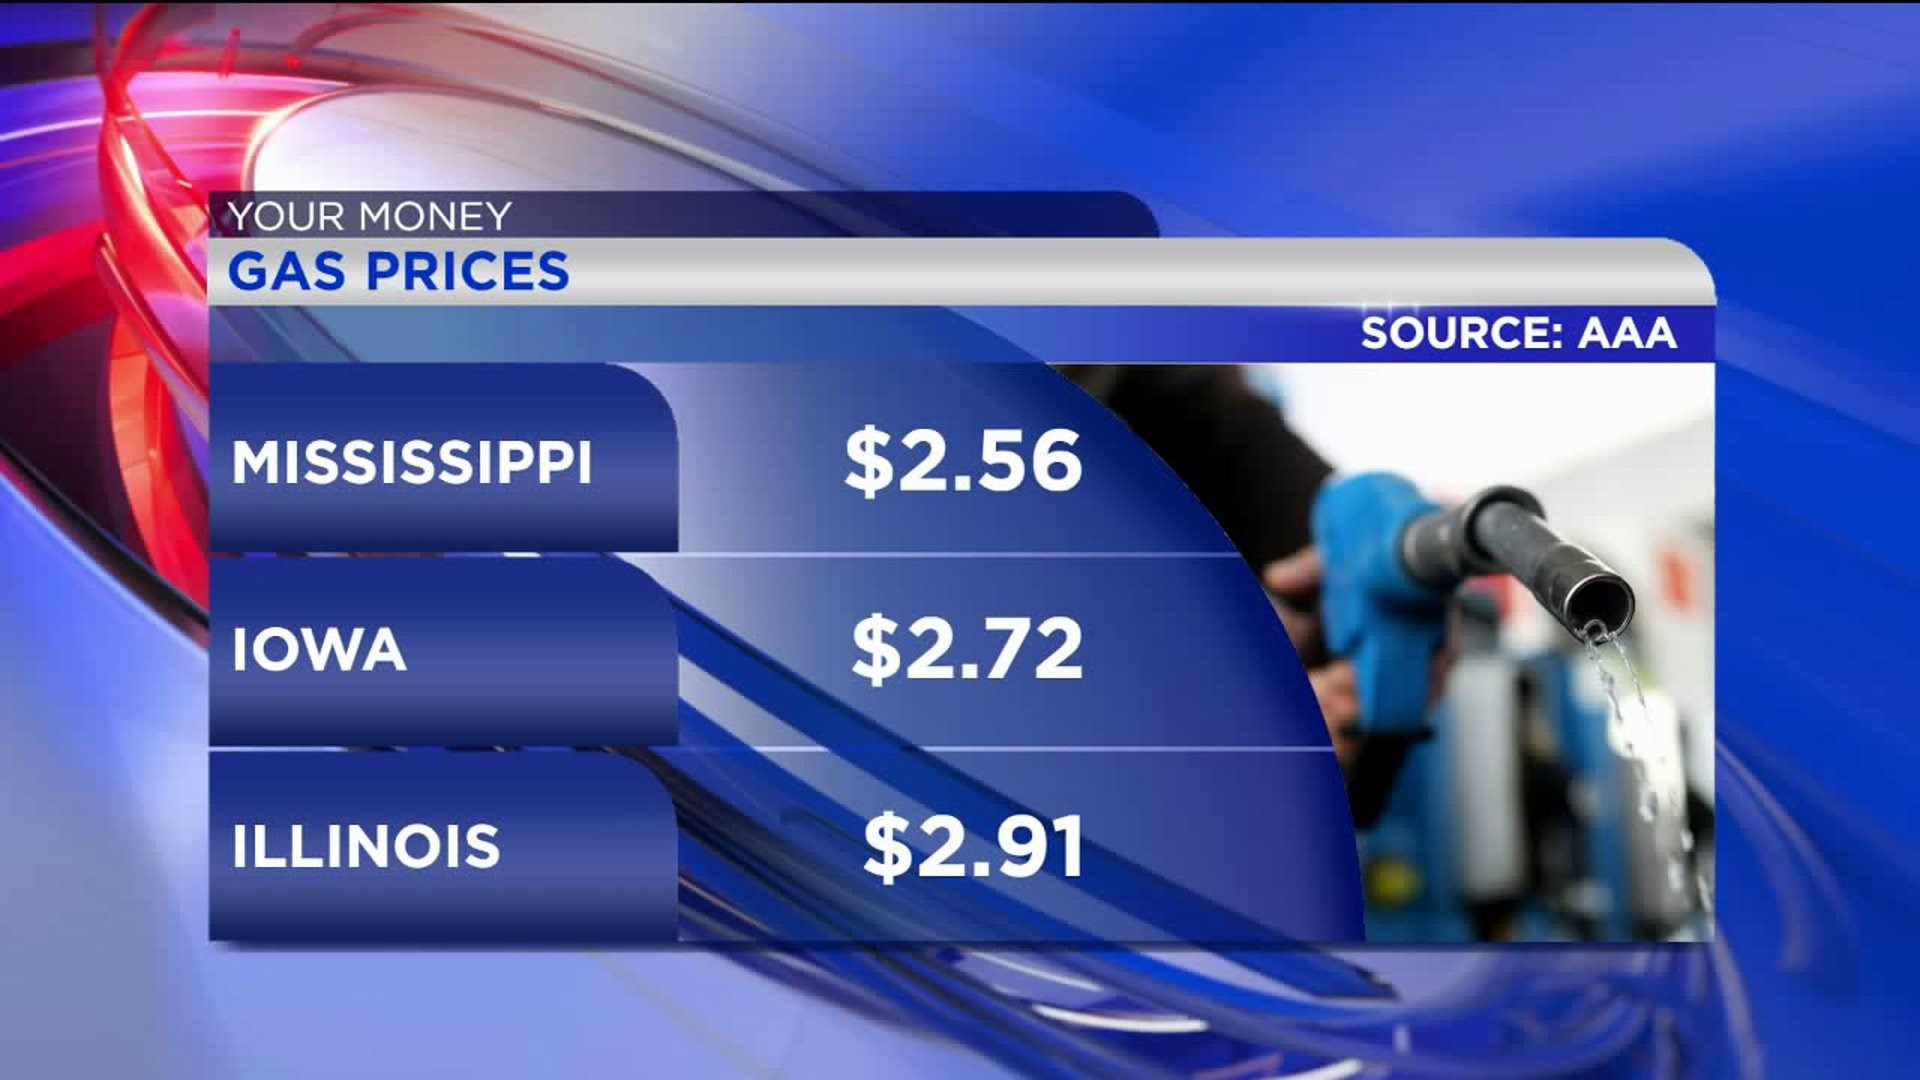 Your Money with Mark: Comparing Iowa and Illinois` Gas Prices